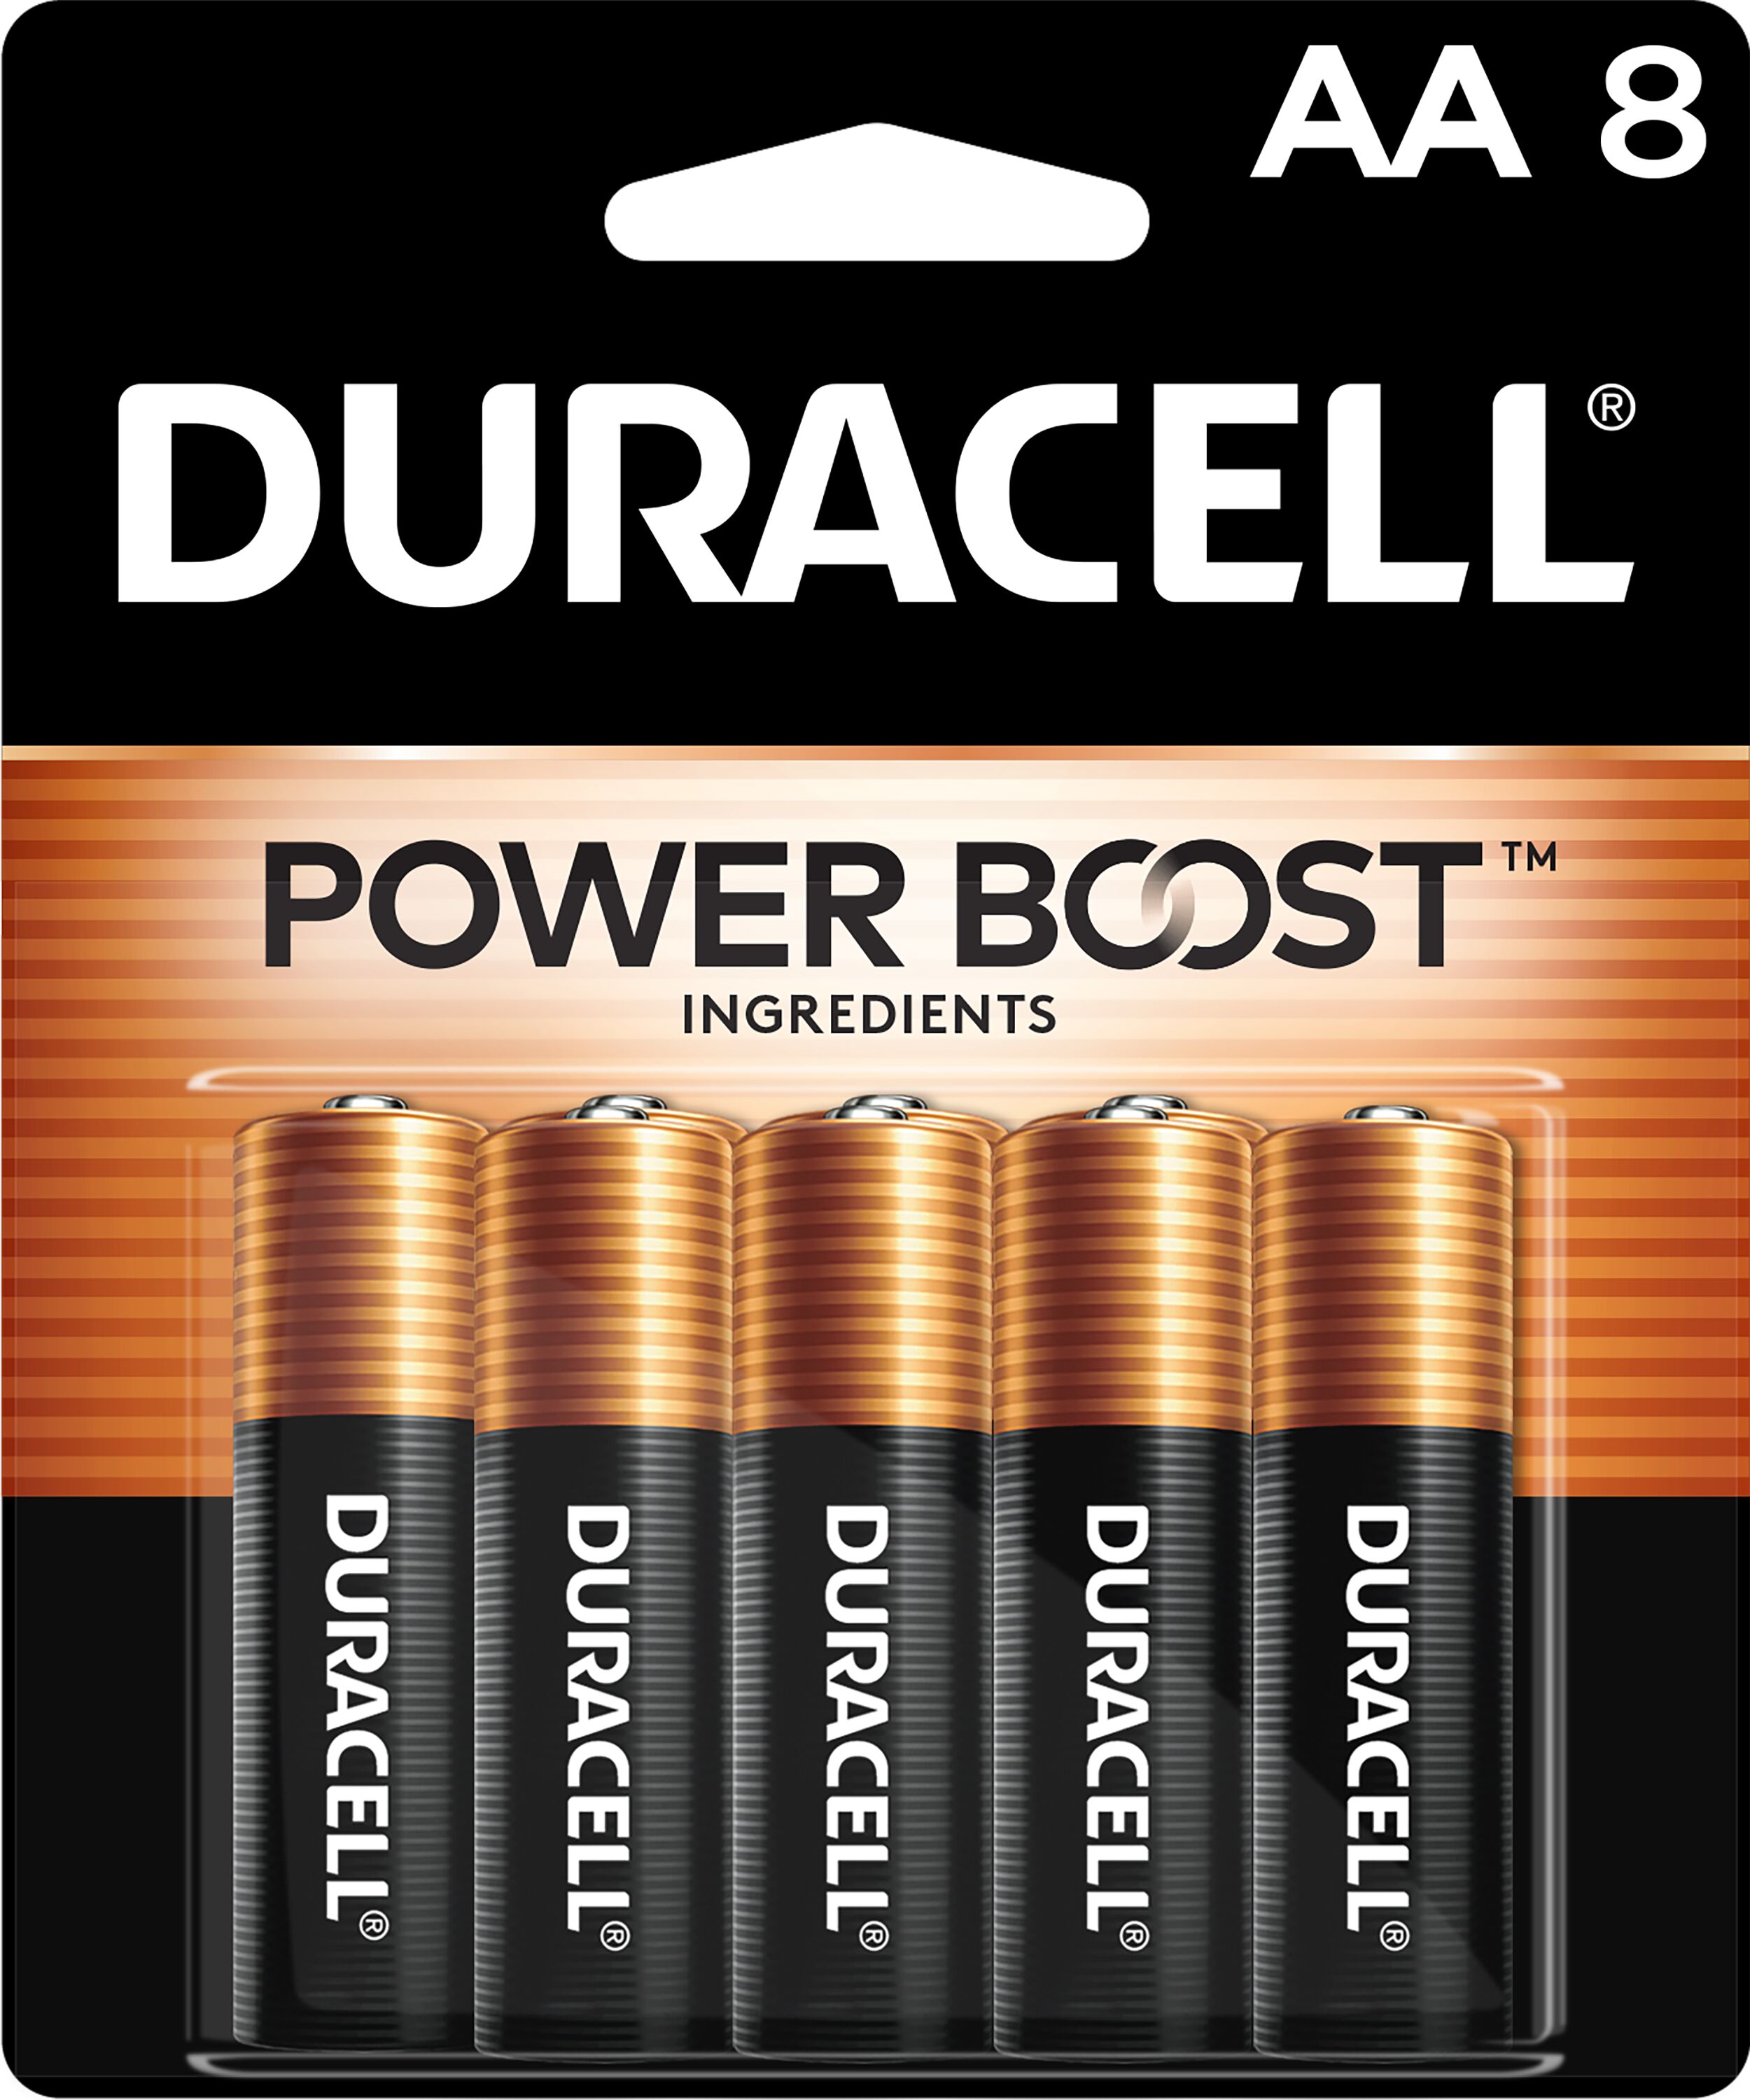 Duracell Coppertop AA Battery with POWER BOOST™, 8 Pack Long-Lasting Batteries - image 1 of 9